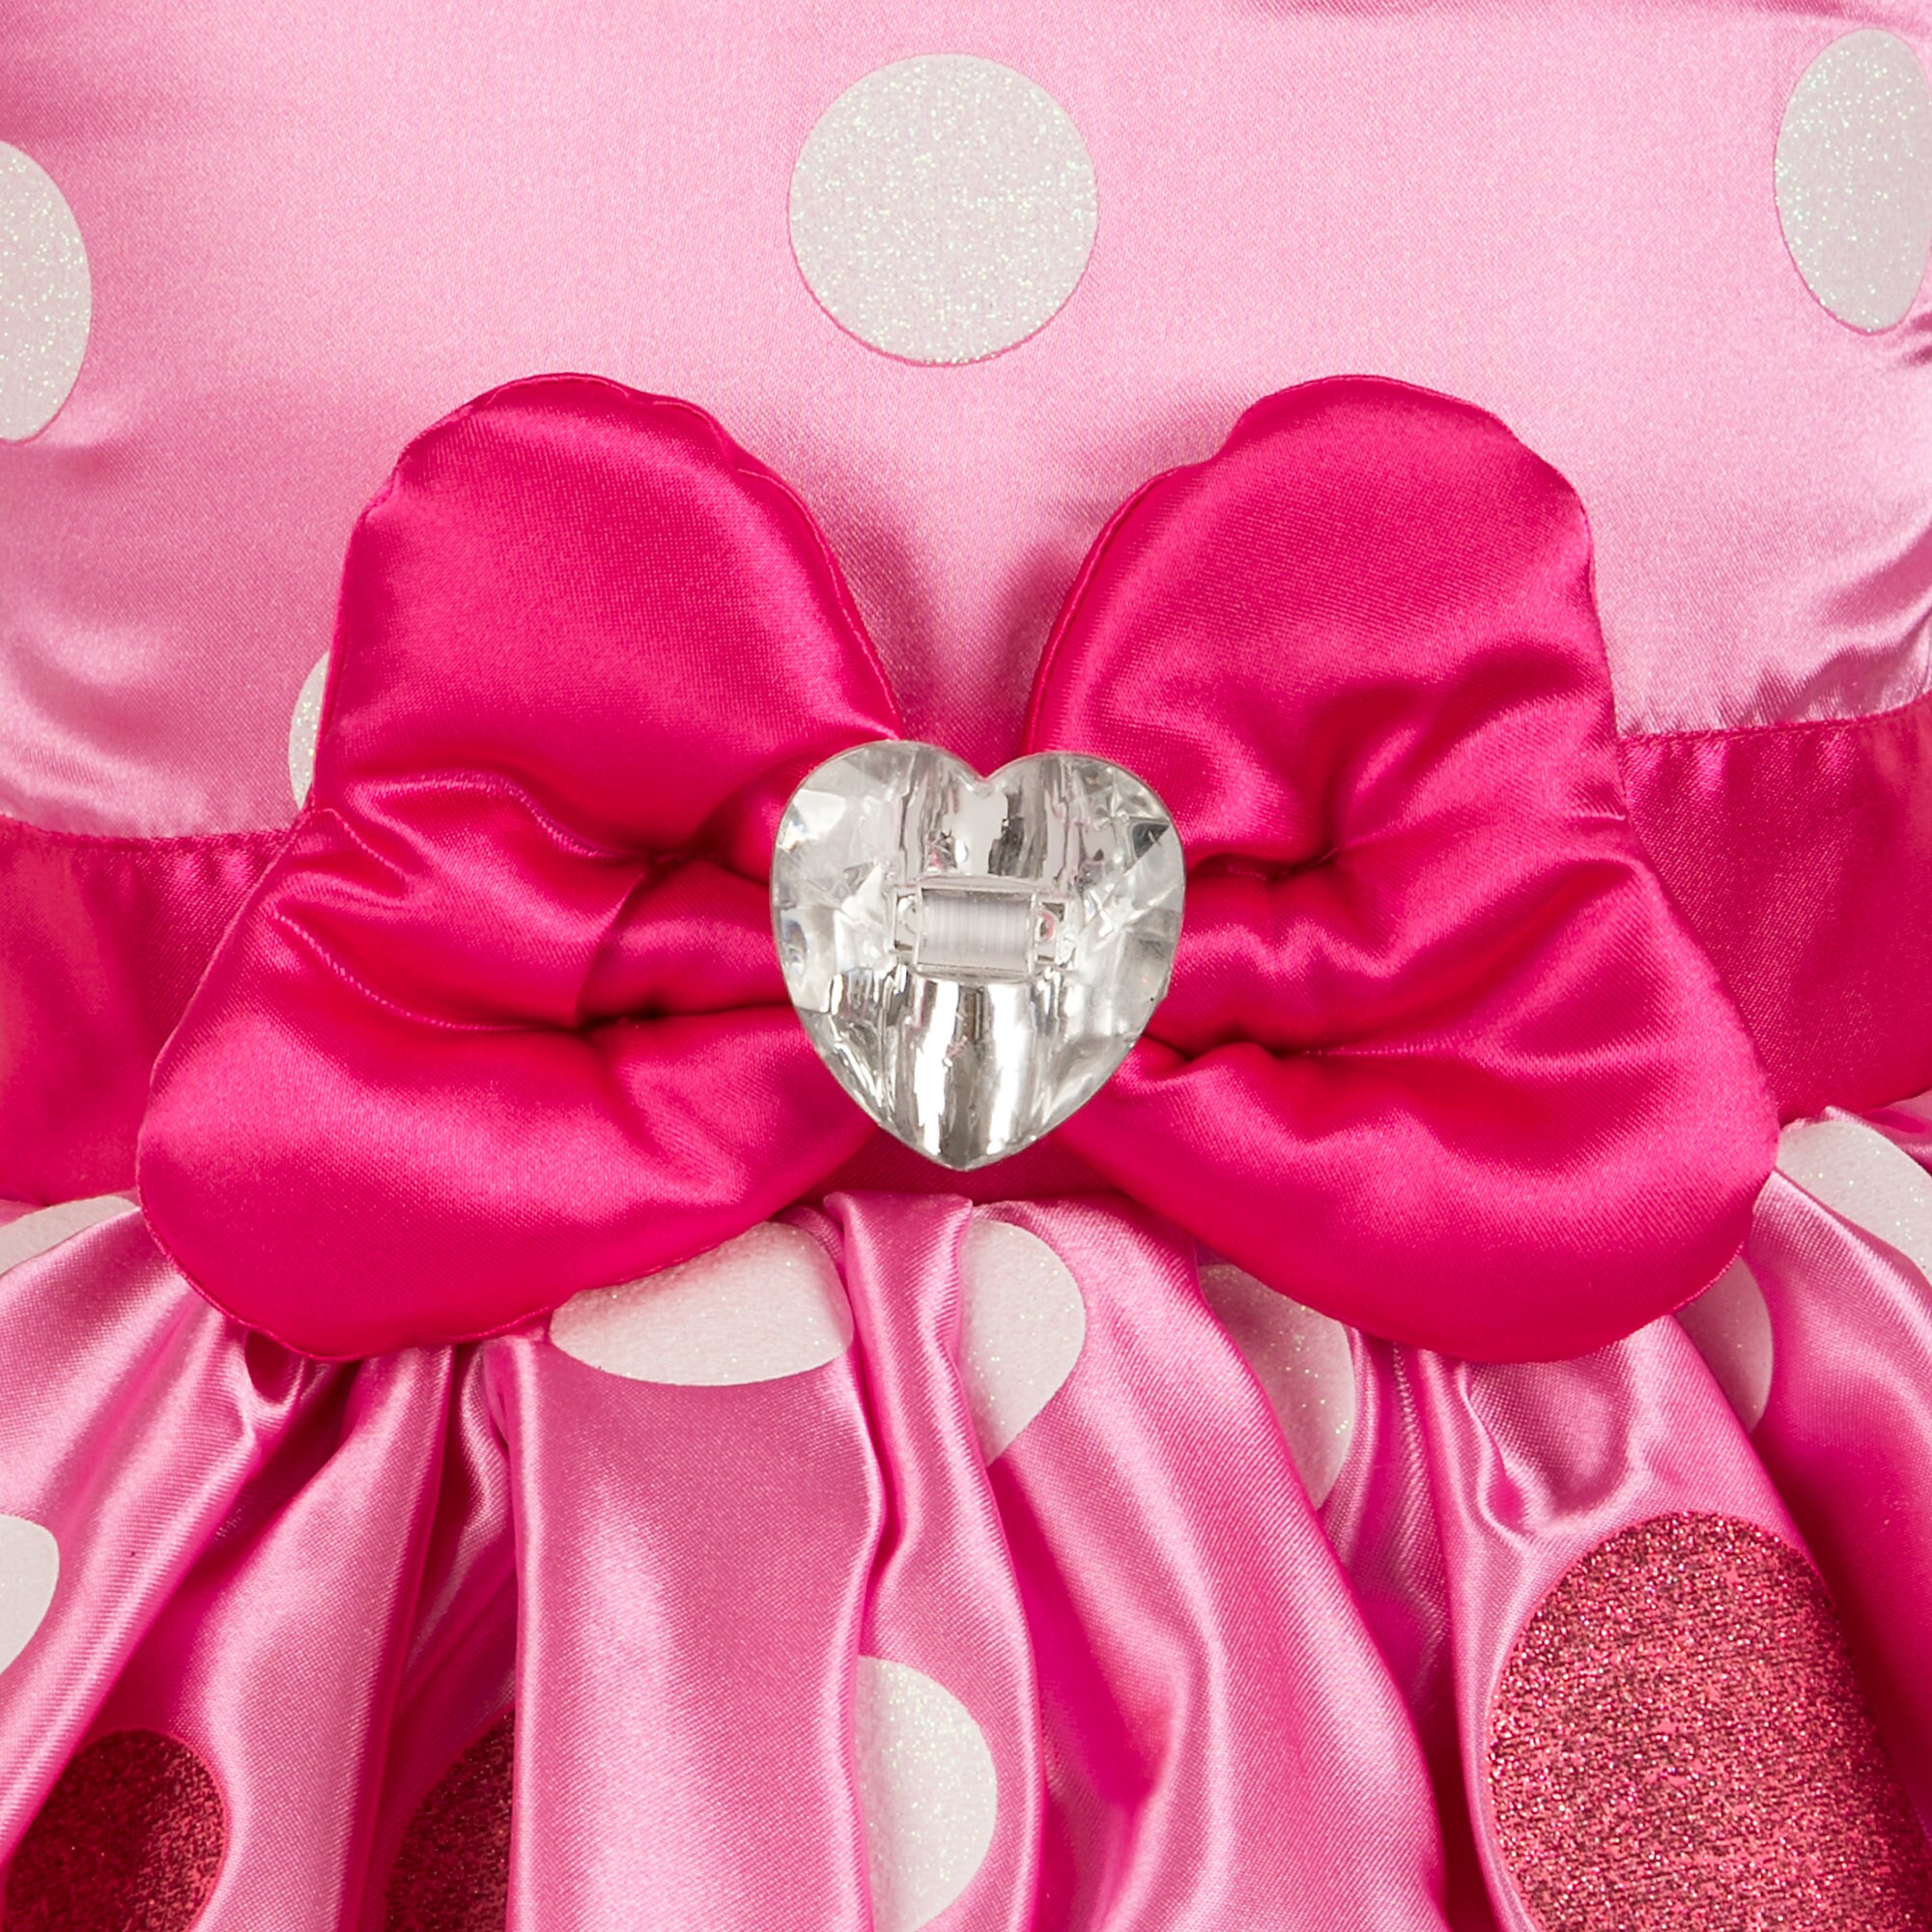 Minnie Mouse Pink Dress Costume for Kids